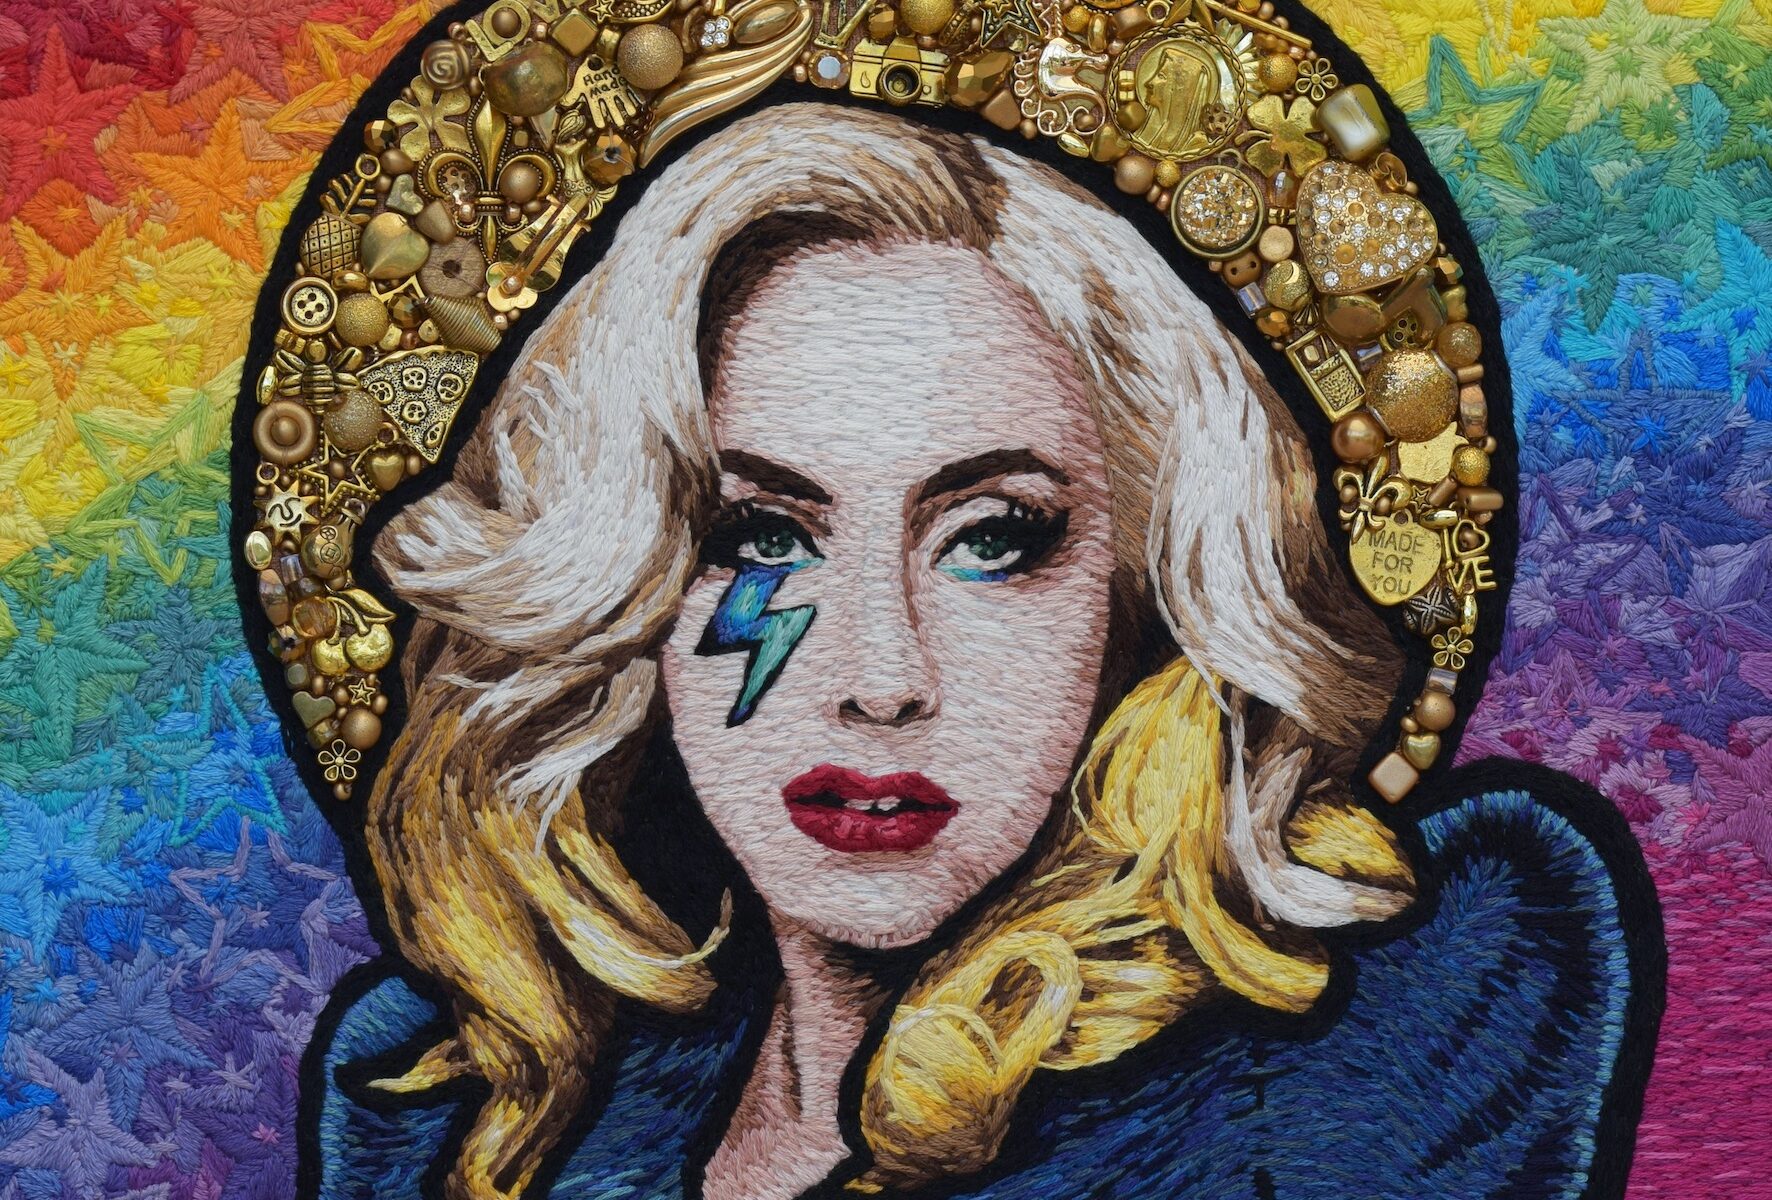 Hand beaded and Hand embroidered image of Lady Gaga